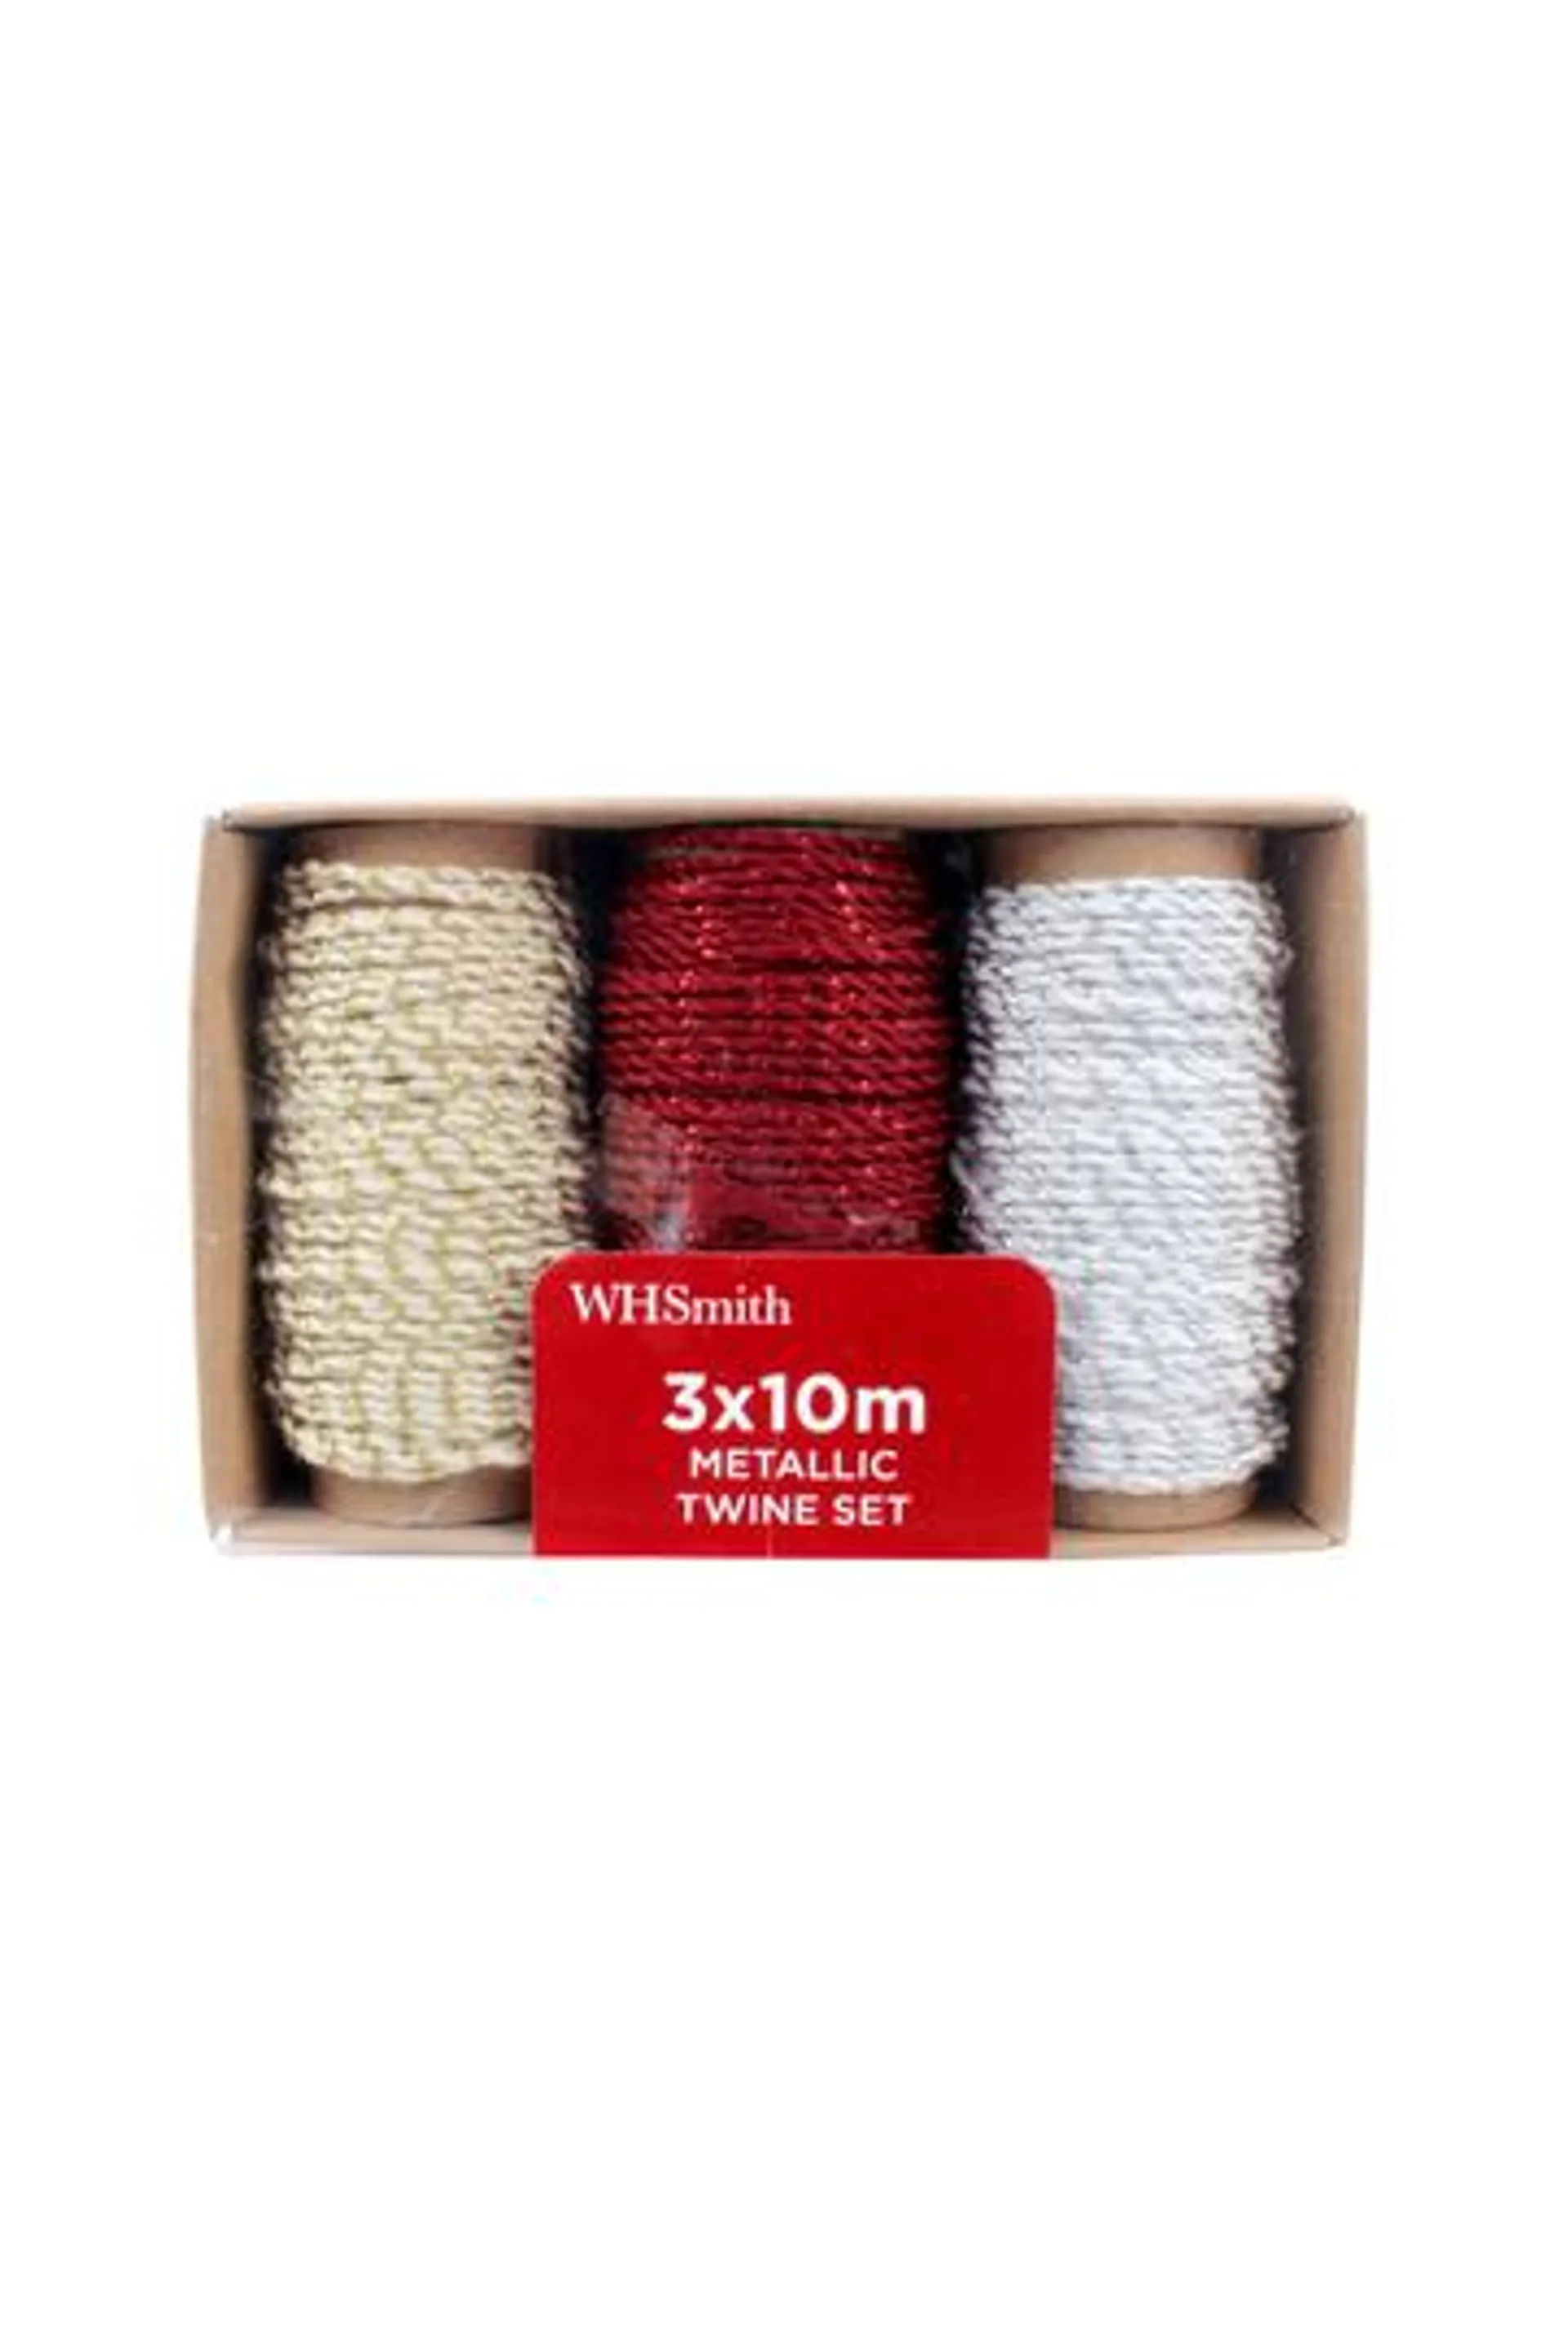 WHSmith Christmas Twine Metallic Red Gold and Silver Pack of 3